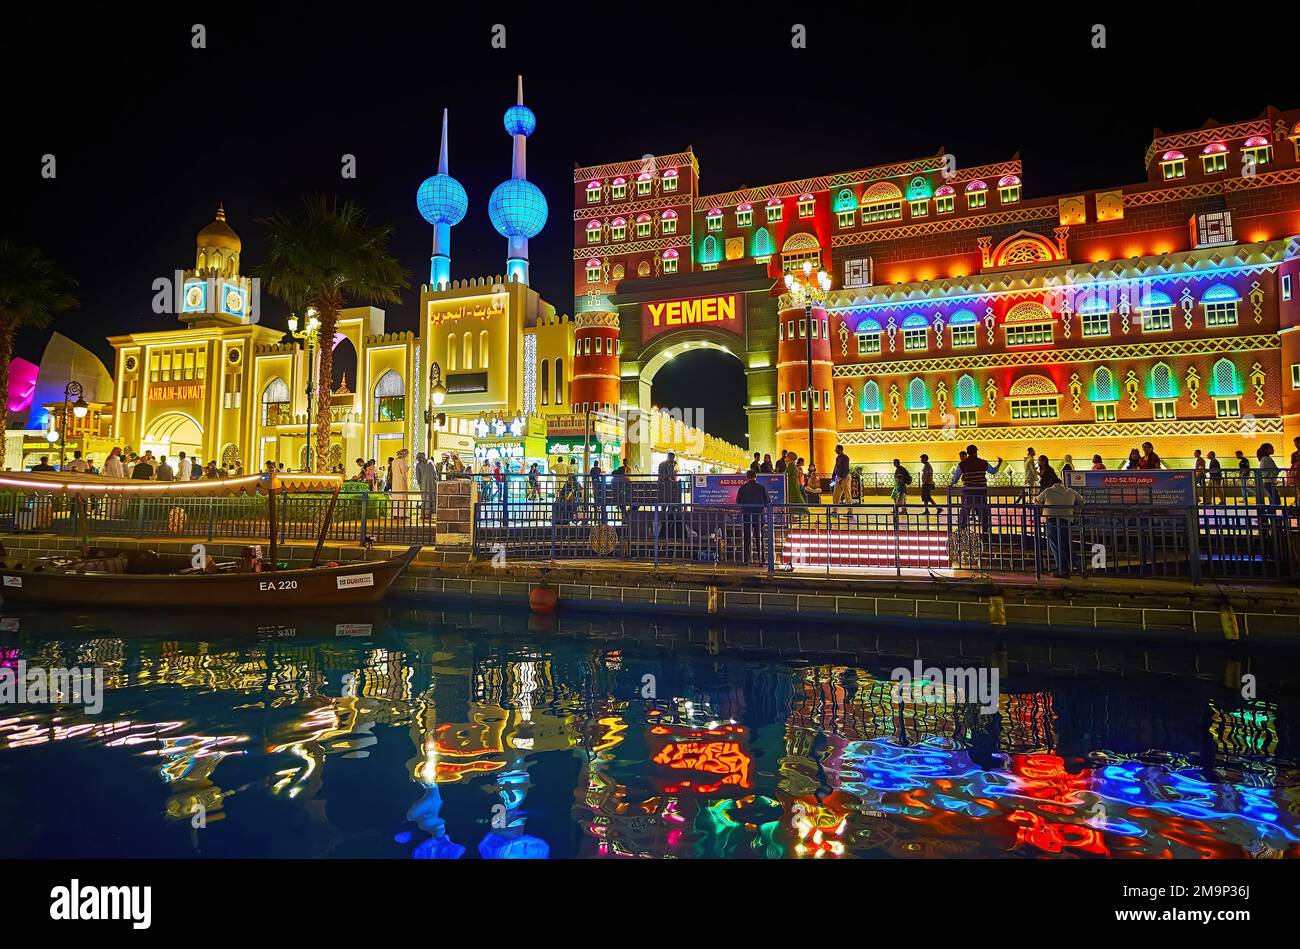 DUBAI, UAE - MARCH 6, 2020: Illuminated pavilions of  Yemen and Kuwait, reflected on waters of the canal in Global Village Dubai, on March 6 in Dubai Stock Photo